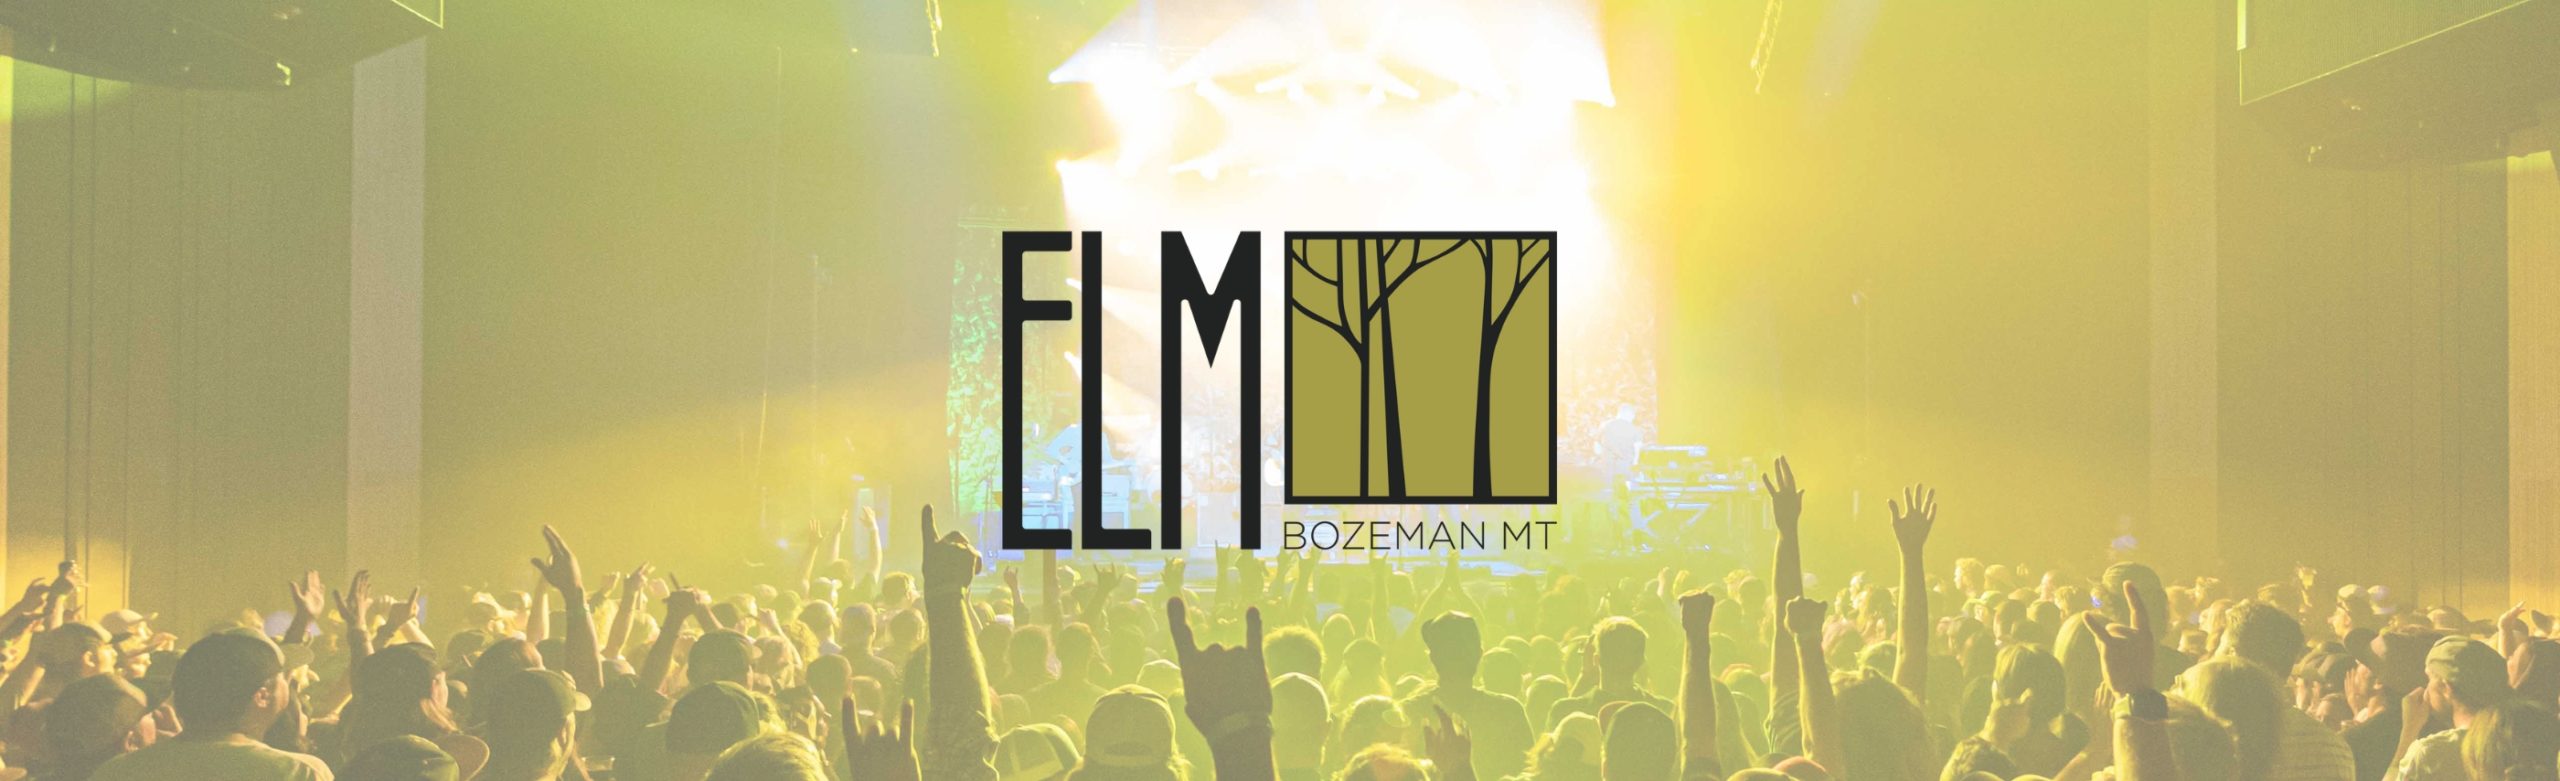 Thank You! The ELM Takes the Podium in Bozeman’s Choice Readers’ Poll Image